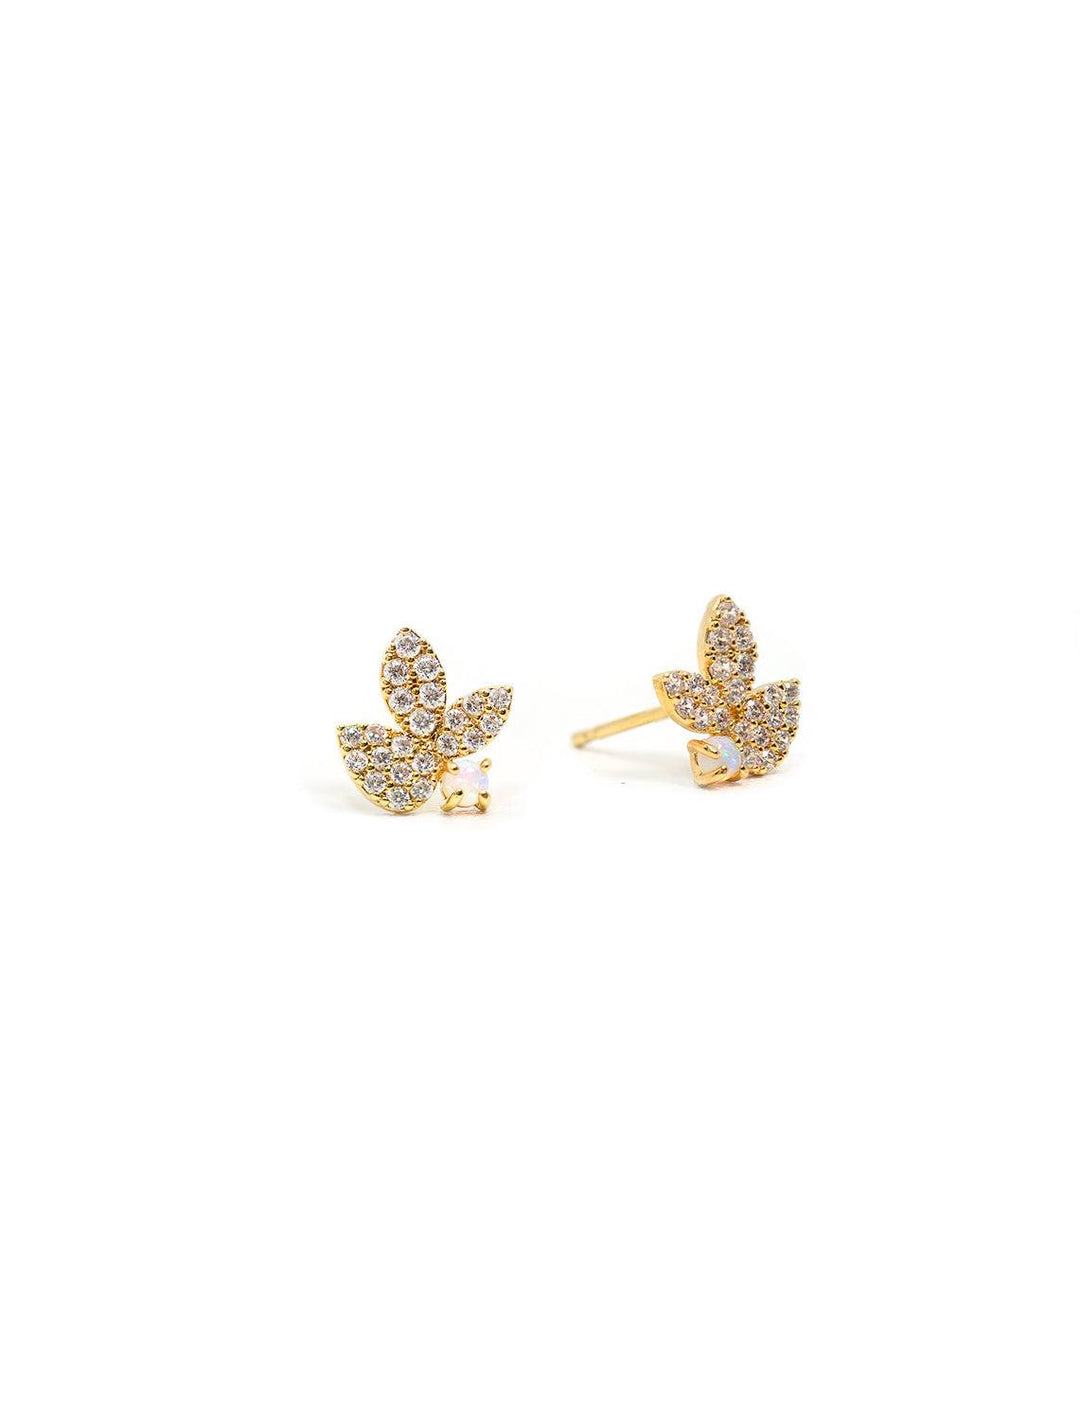 Tai jewelry's pave leaf studs with opal accent.